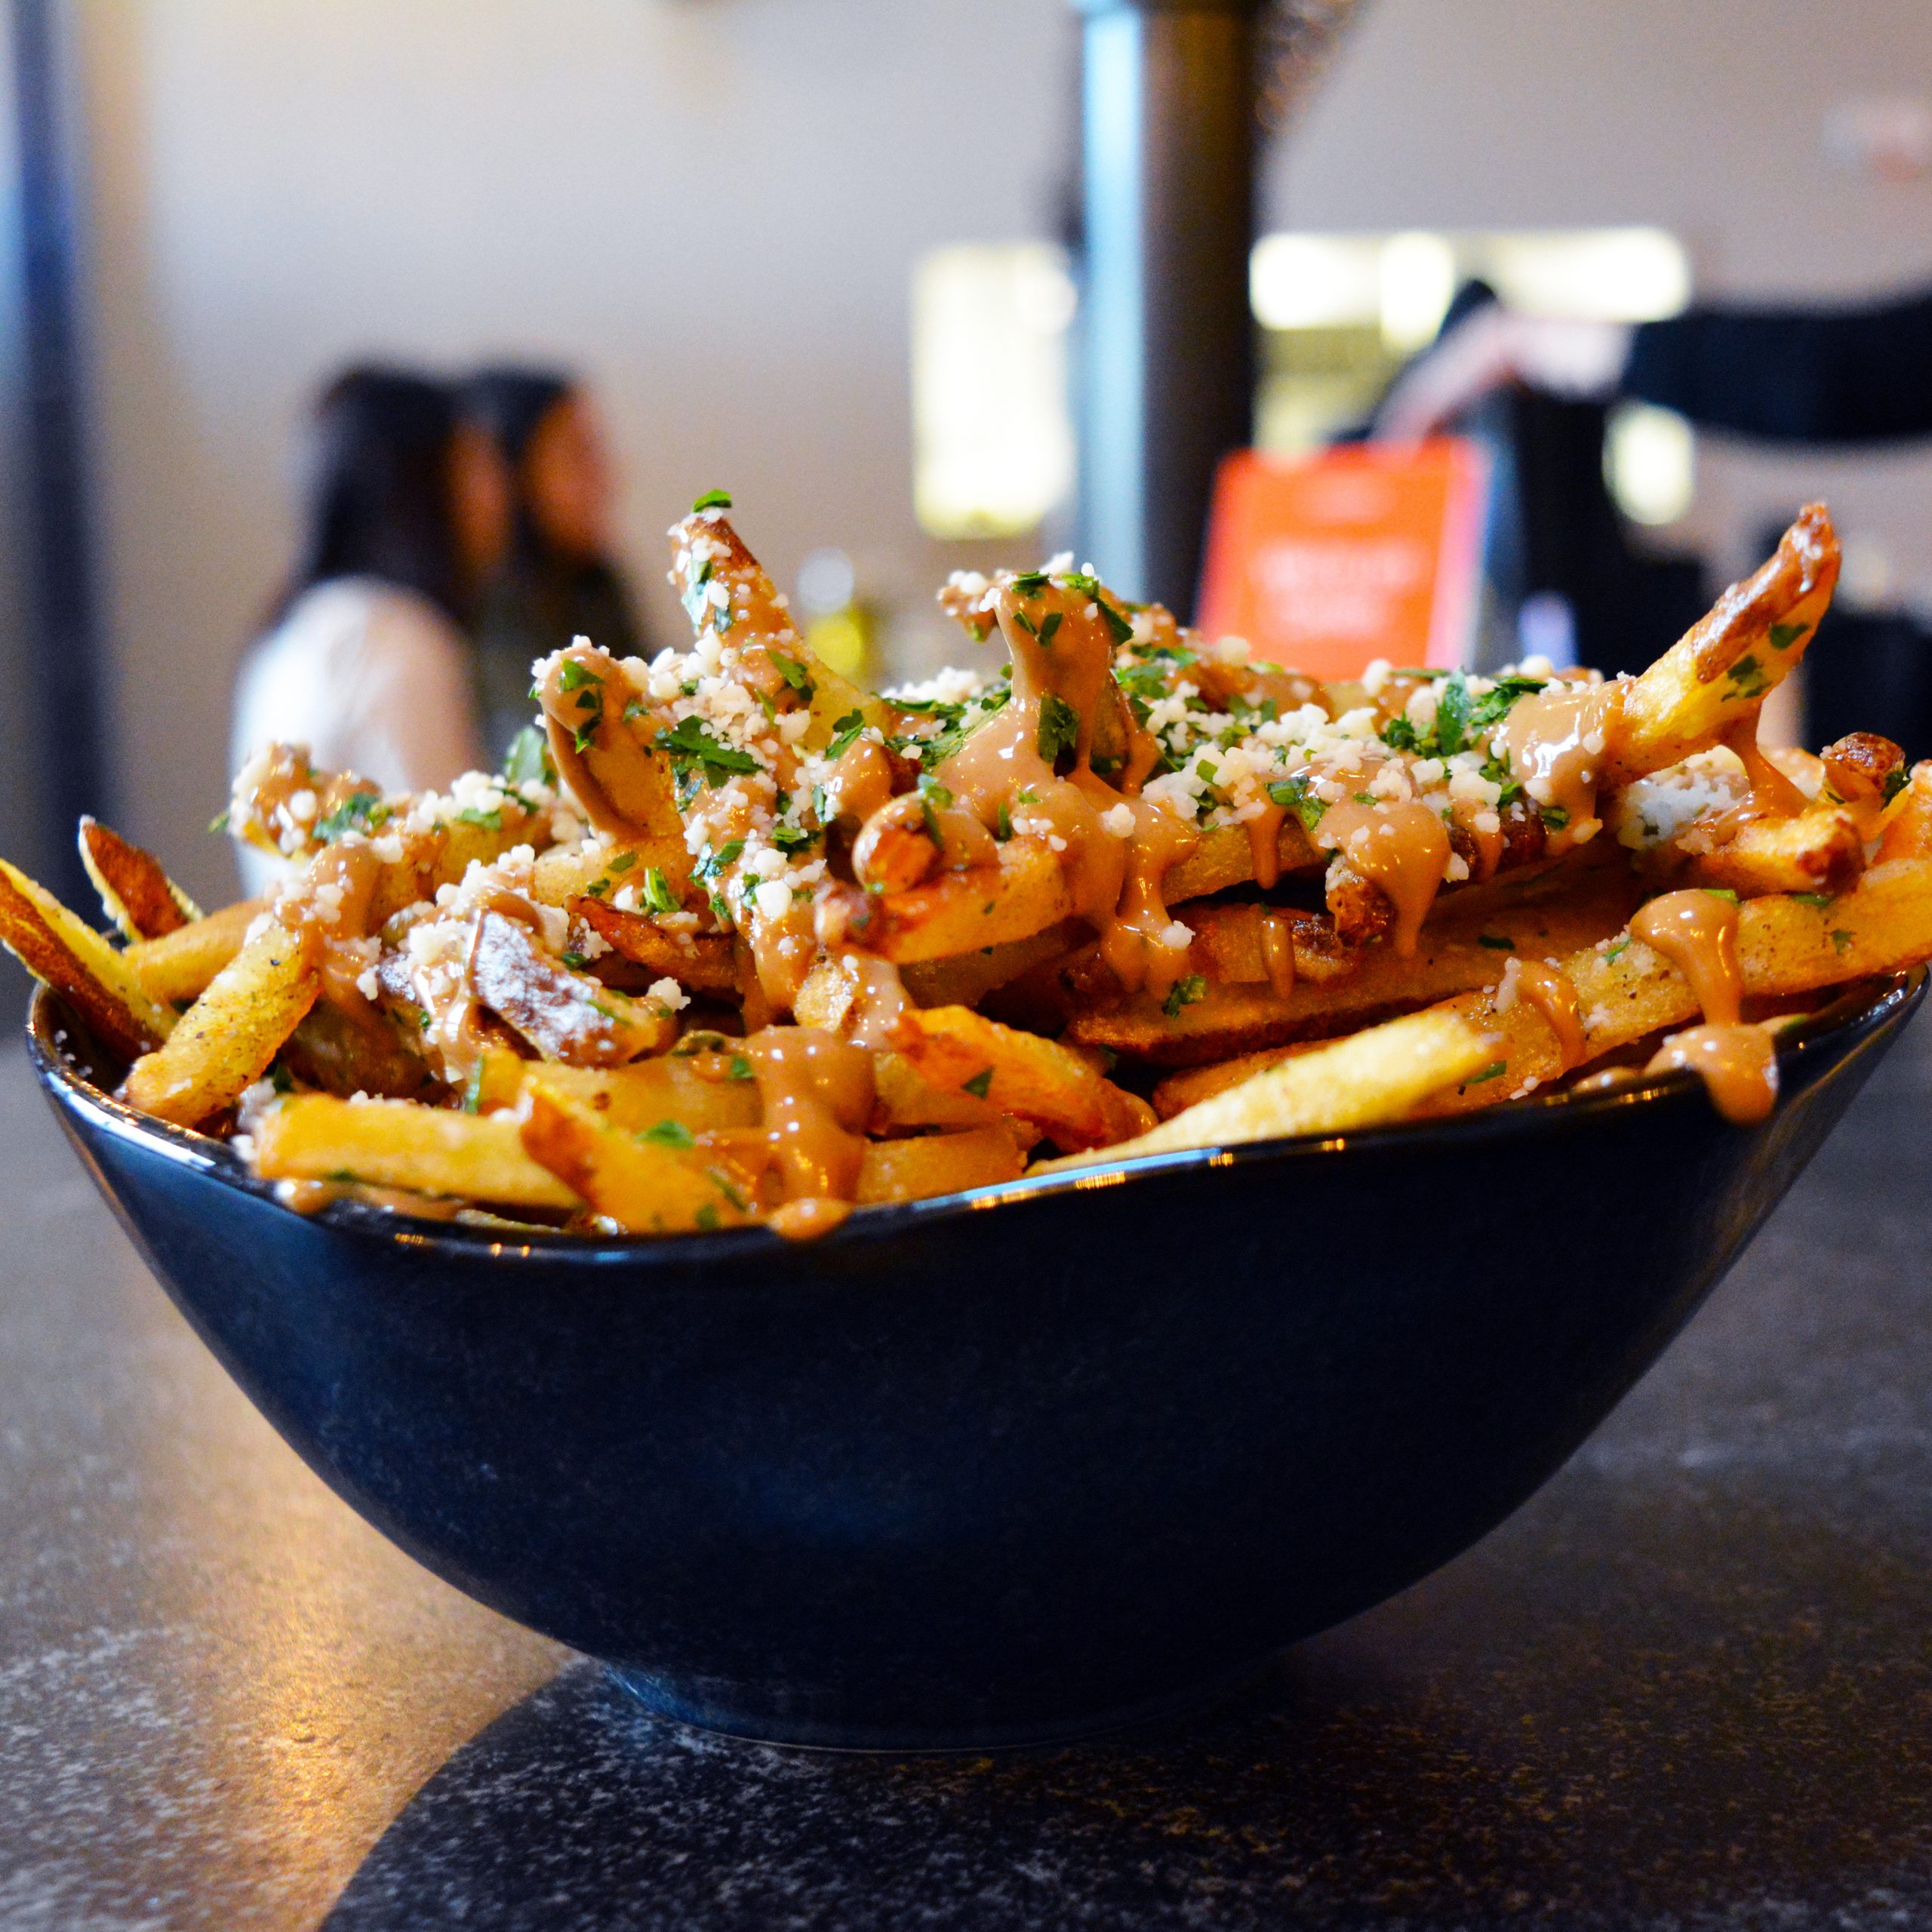 A photo of a bowl of fries, tossed in bone marrow, and topped with black garlic aioli